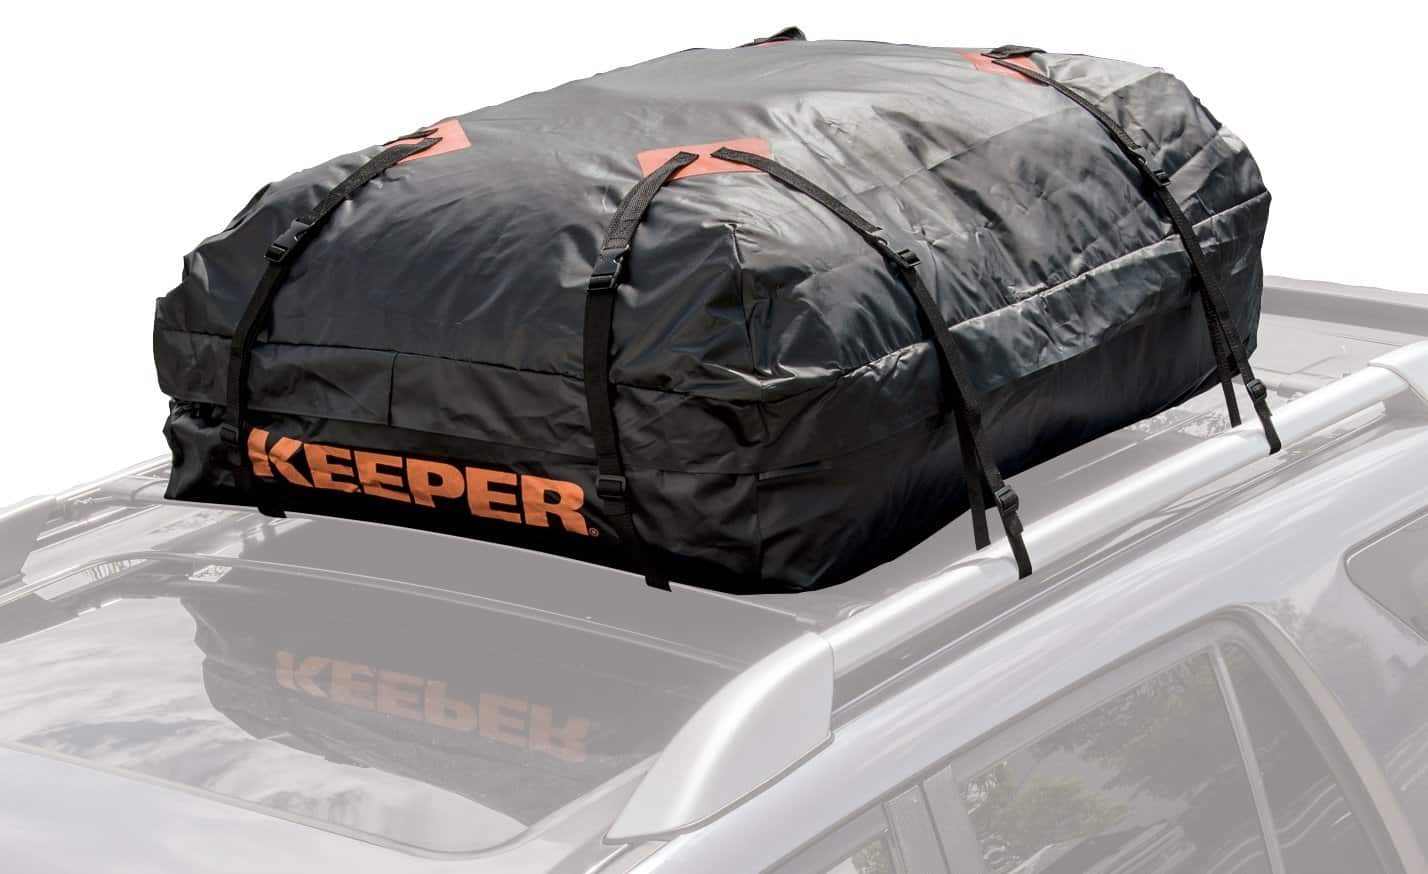 Heavy Duty 11 Cubic Feet Rooftop Cargo Carrier Bag Waterproof Car Top Carrier for Extra Car Roof Storage 